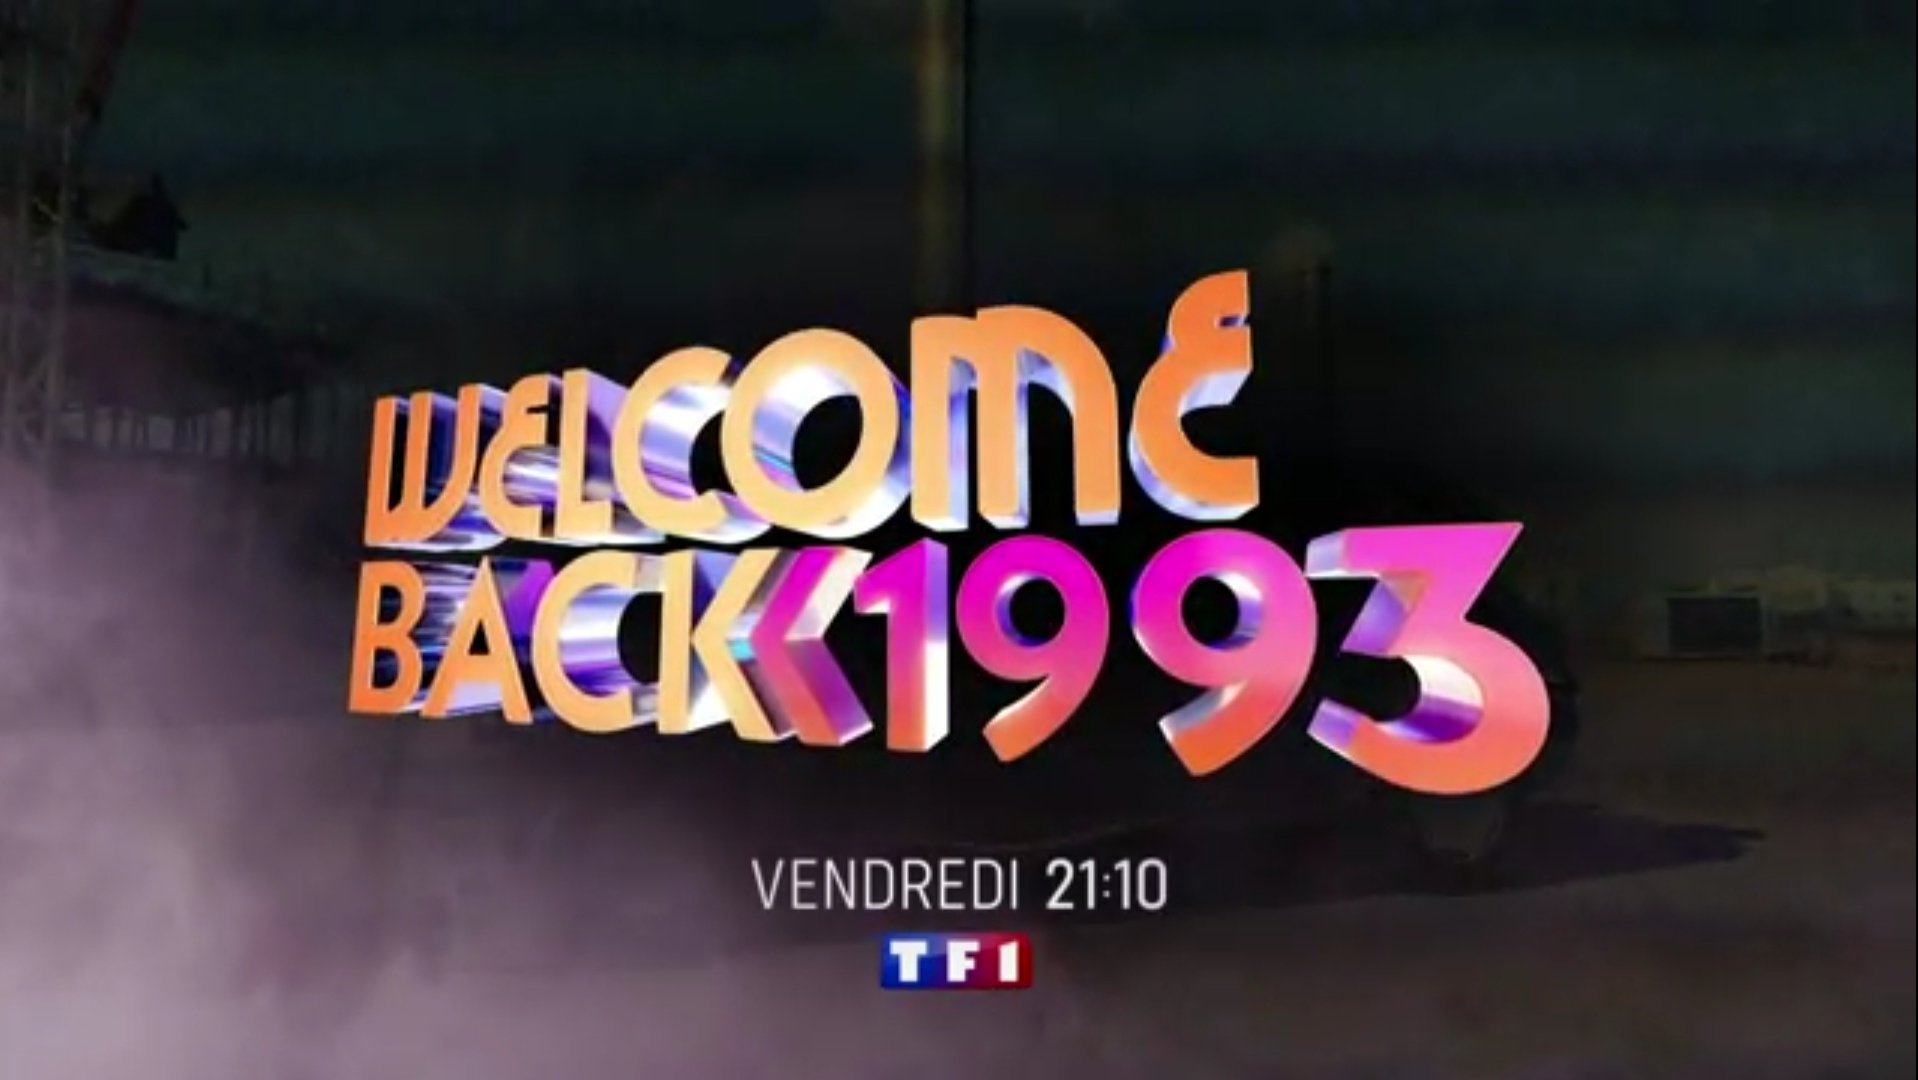 Welcome Back 1993 - TF1 - Camille Combal -